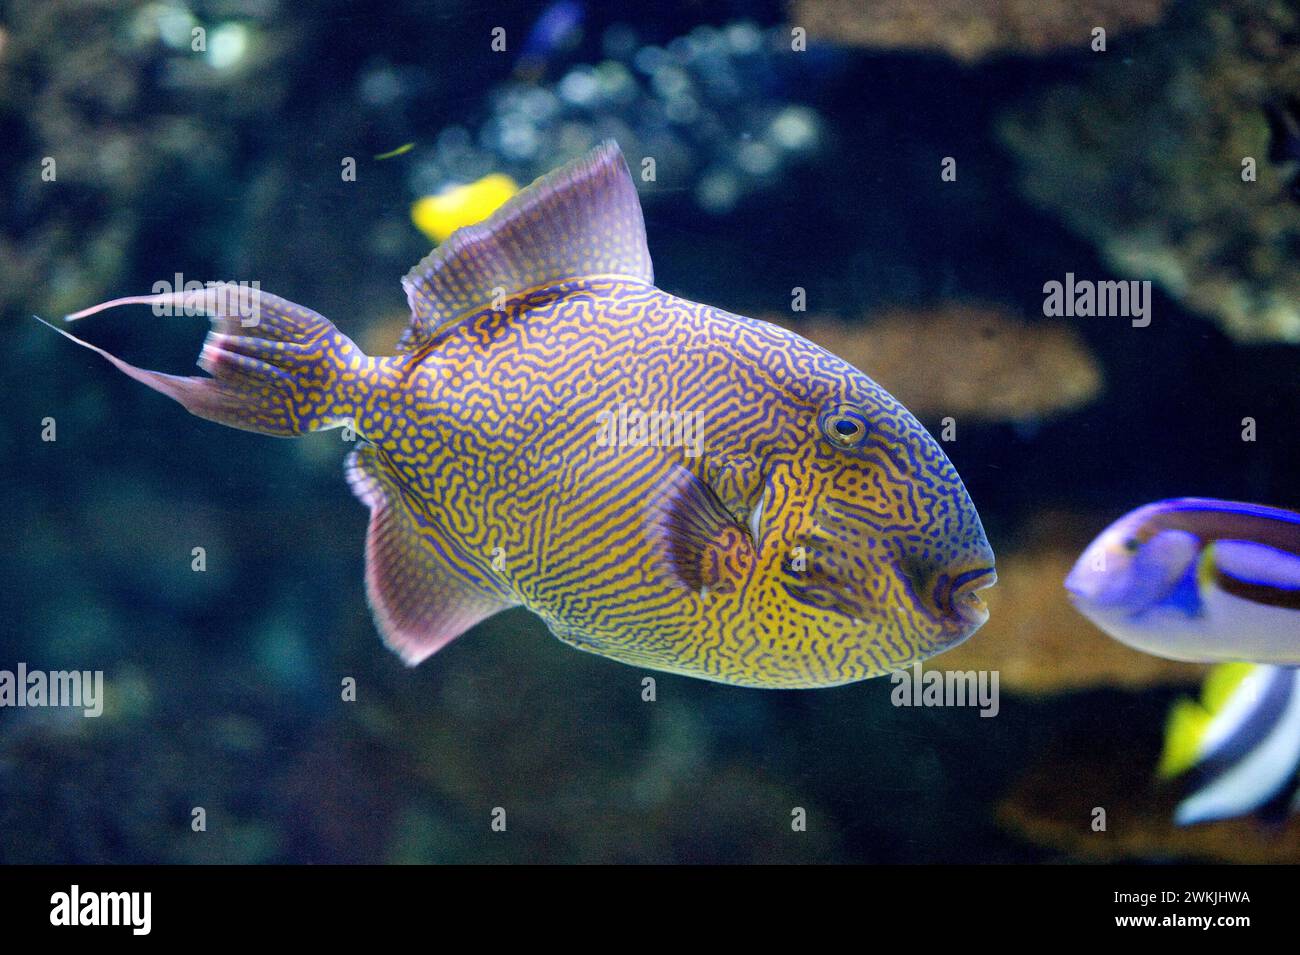 Blue triggerfish (Pseudobalistes fuscus) is a marine fish native to tropical Indo-Pacific Ocean and Red Sea. Stock Photo